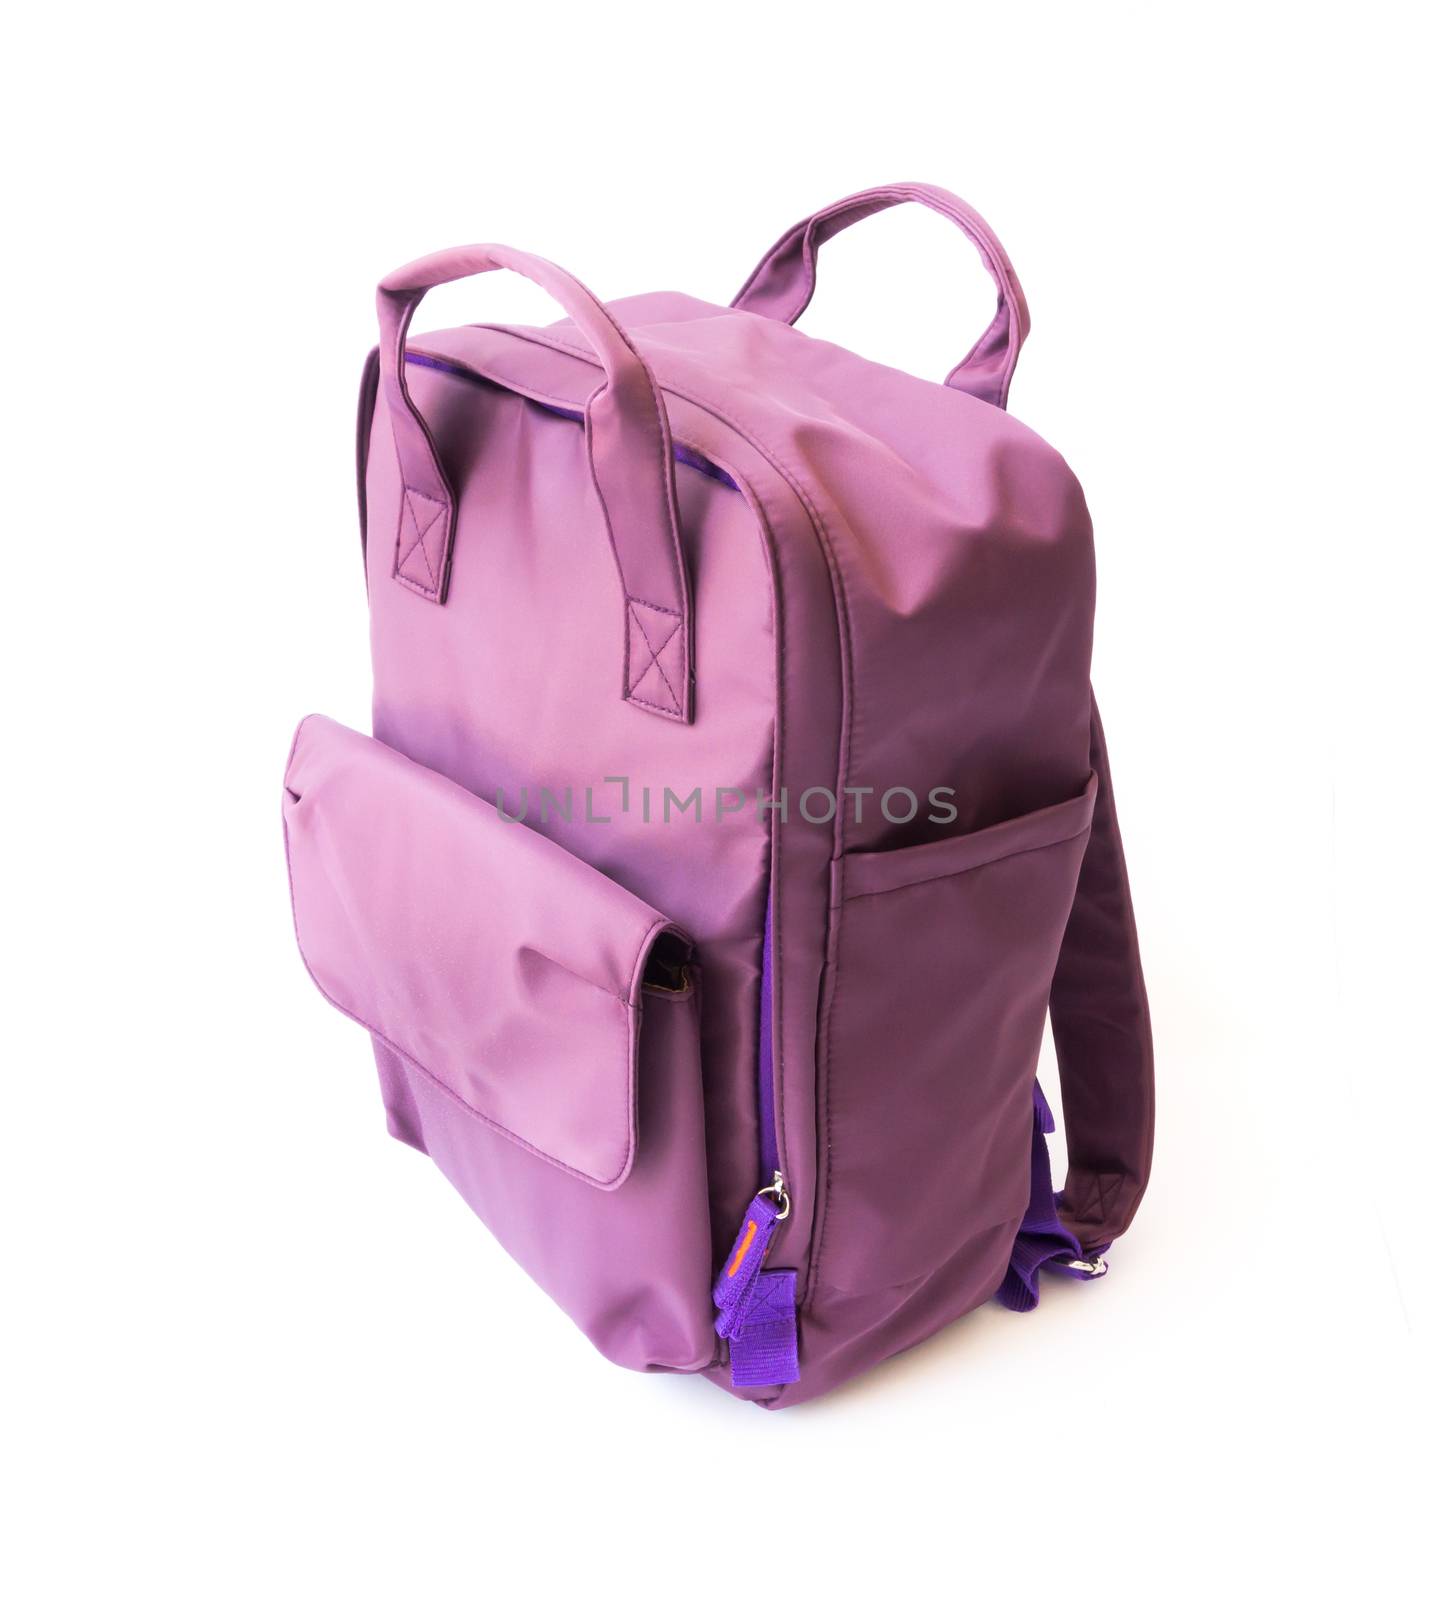 Purple backpack on white background for school or tourist traveler concept